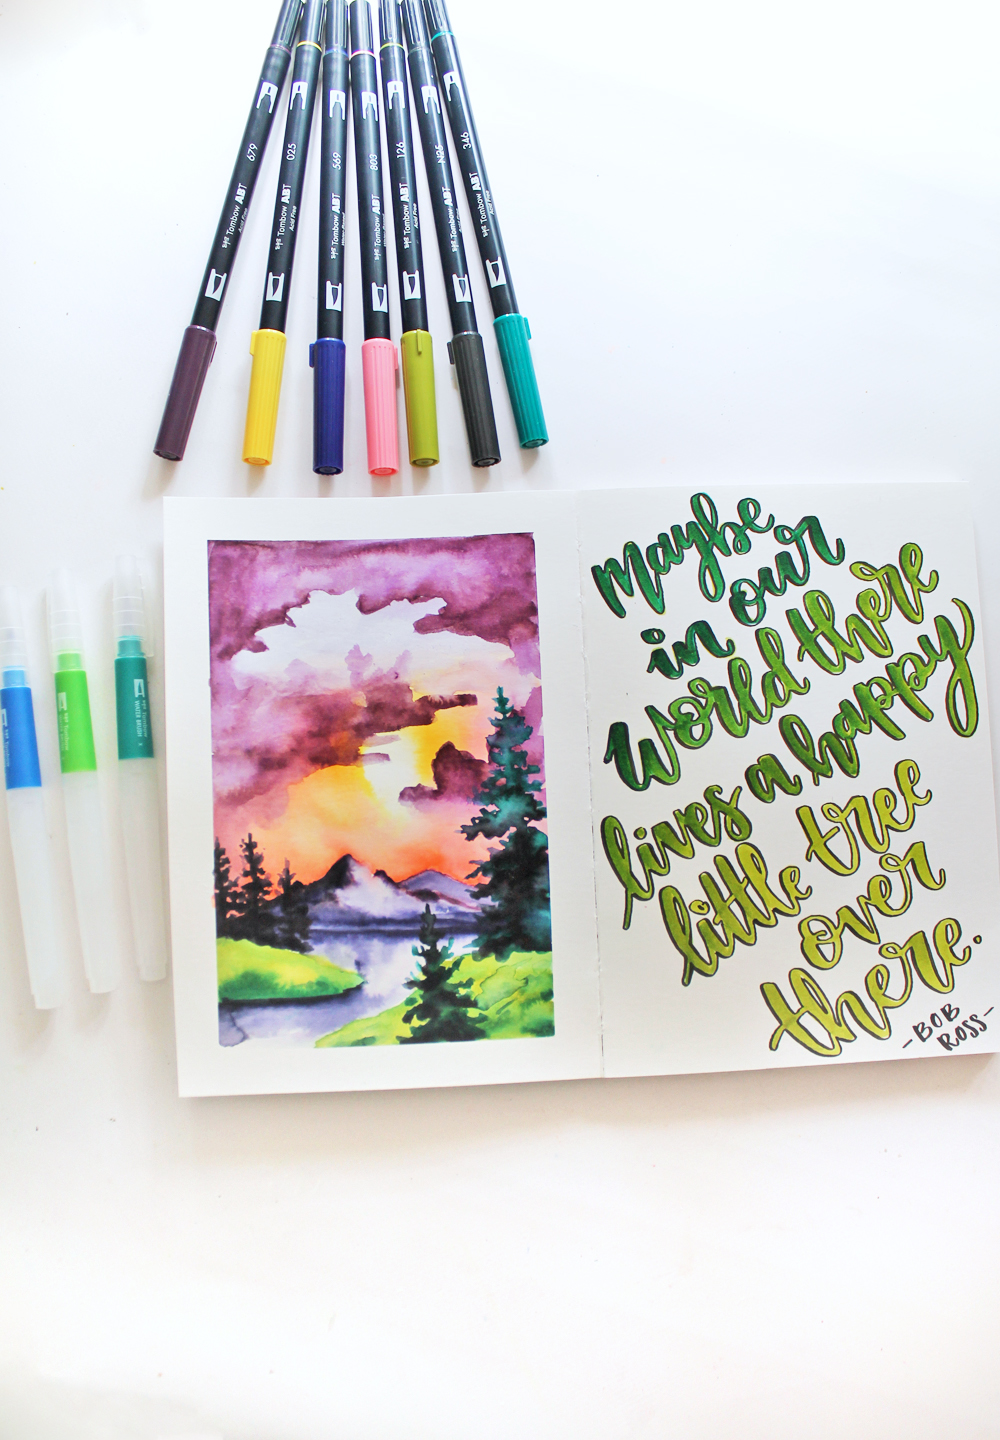 Martin Luther King Junior Is Verbeteren How to Paint like Bob Ross Using Dual Brush Pens - Tombow USA Blog